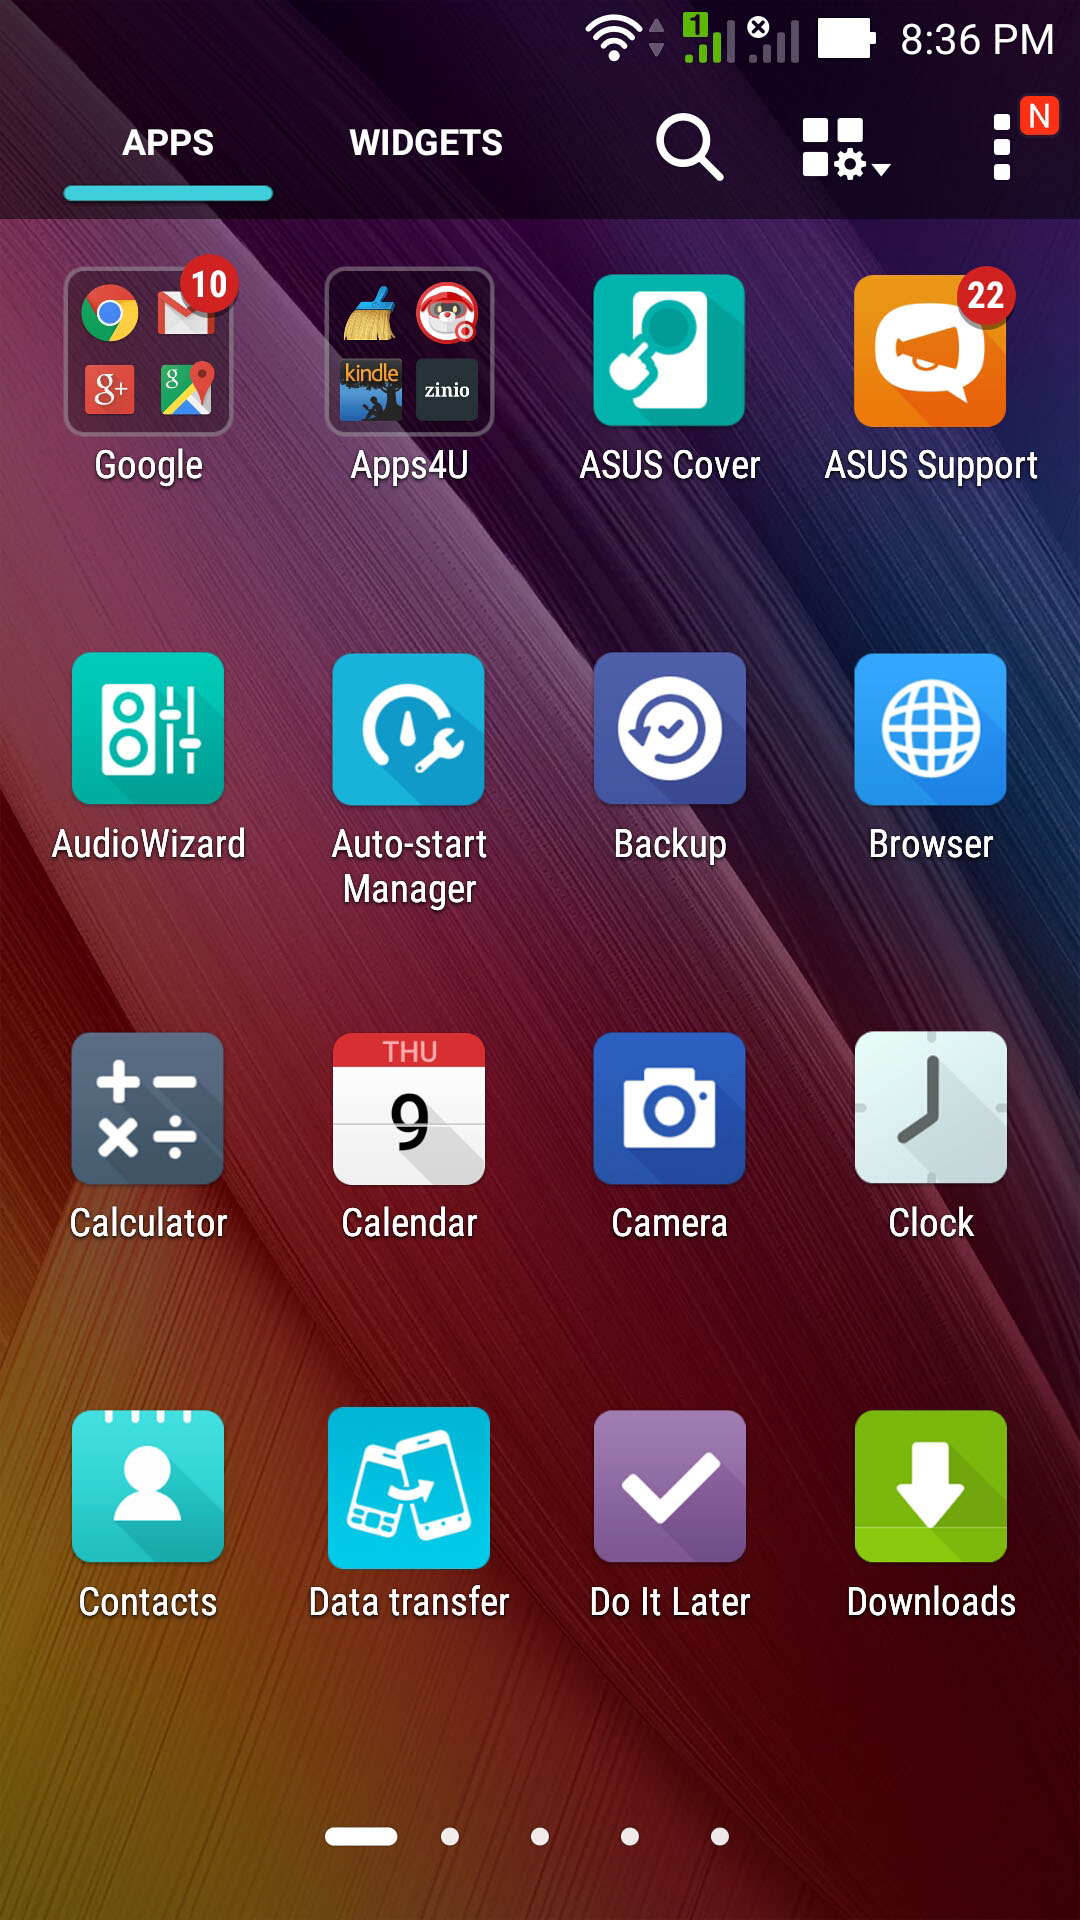 ASUS ZenFone 2 Smartphone Review: The Budget Android Wonder – Techgage